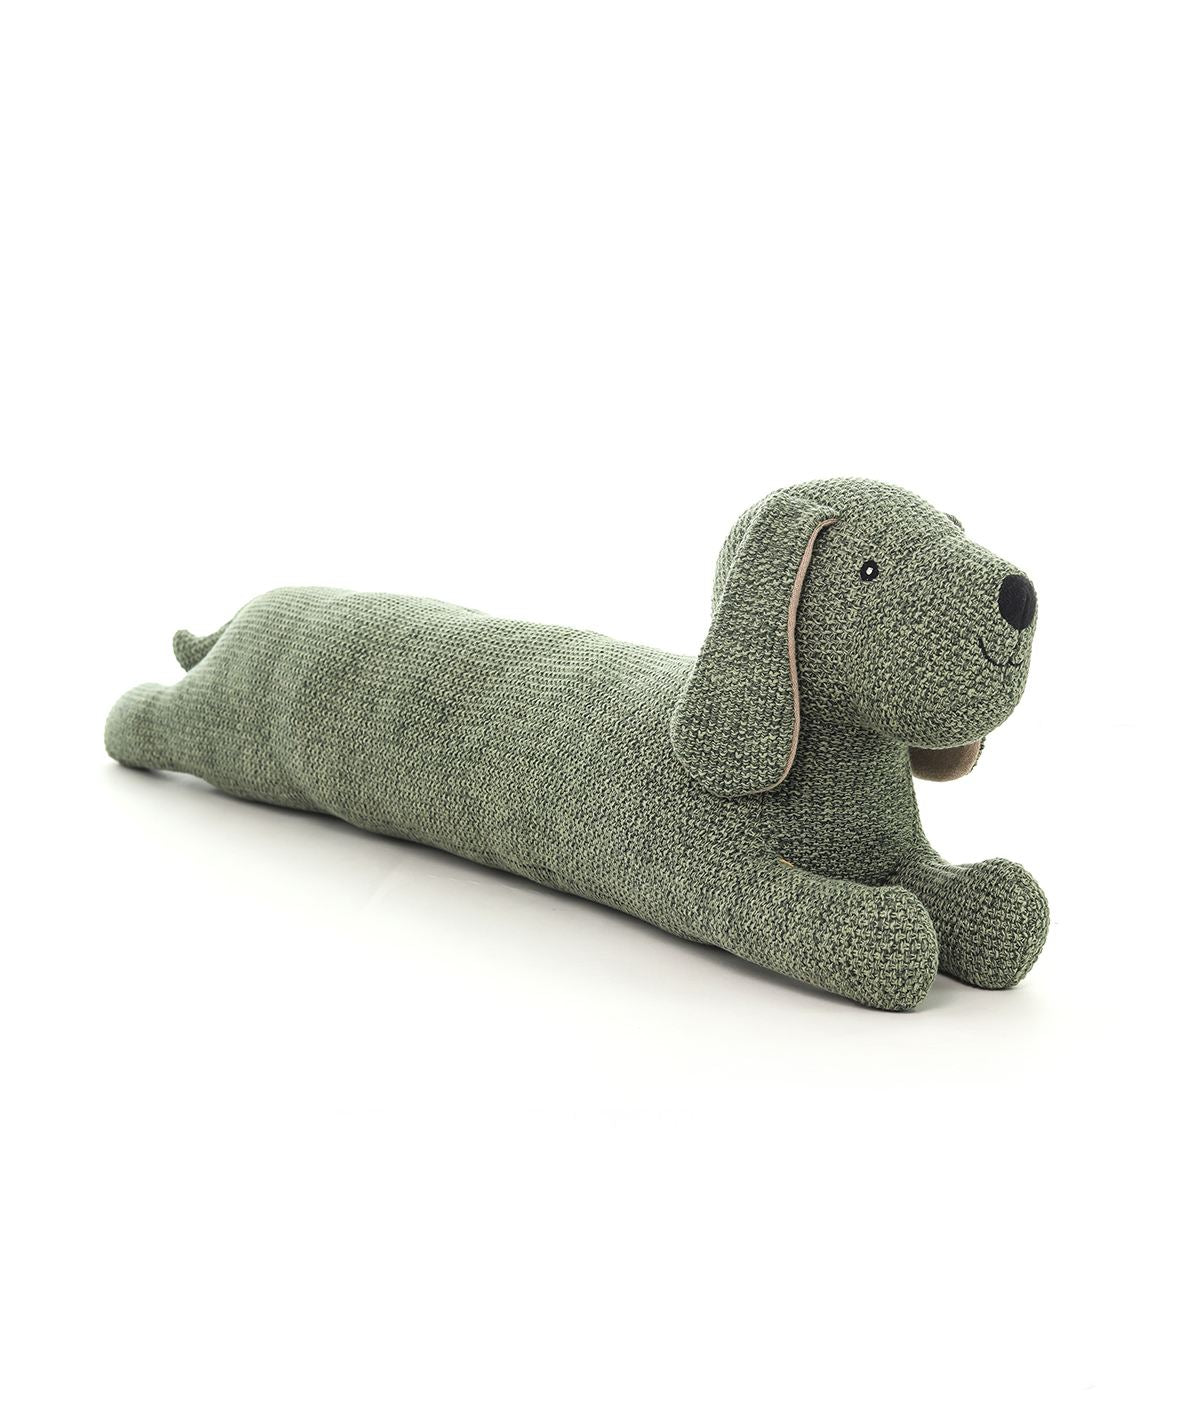 Max Dog Cotton Knitted Stuffed Soft Toy (Bermuda Green)